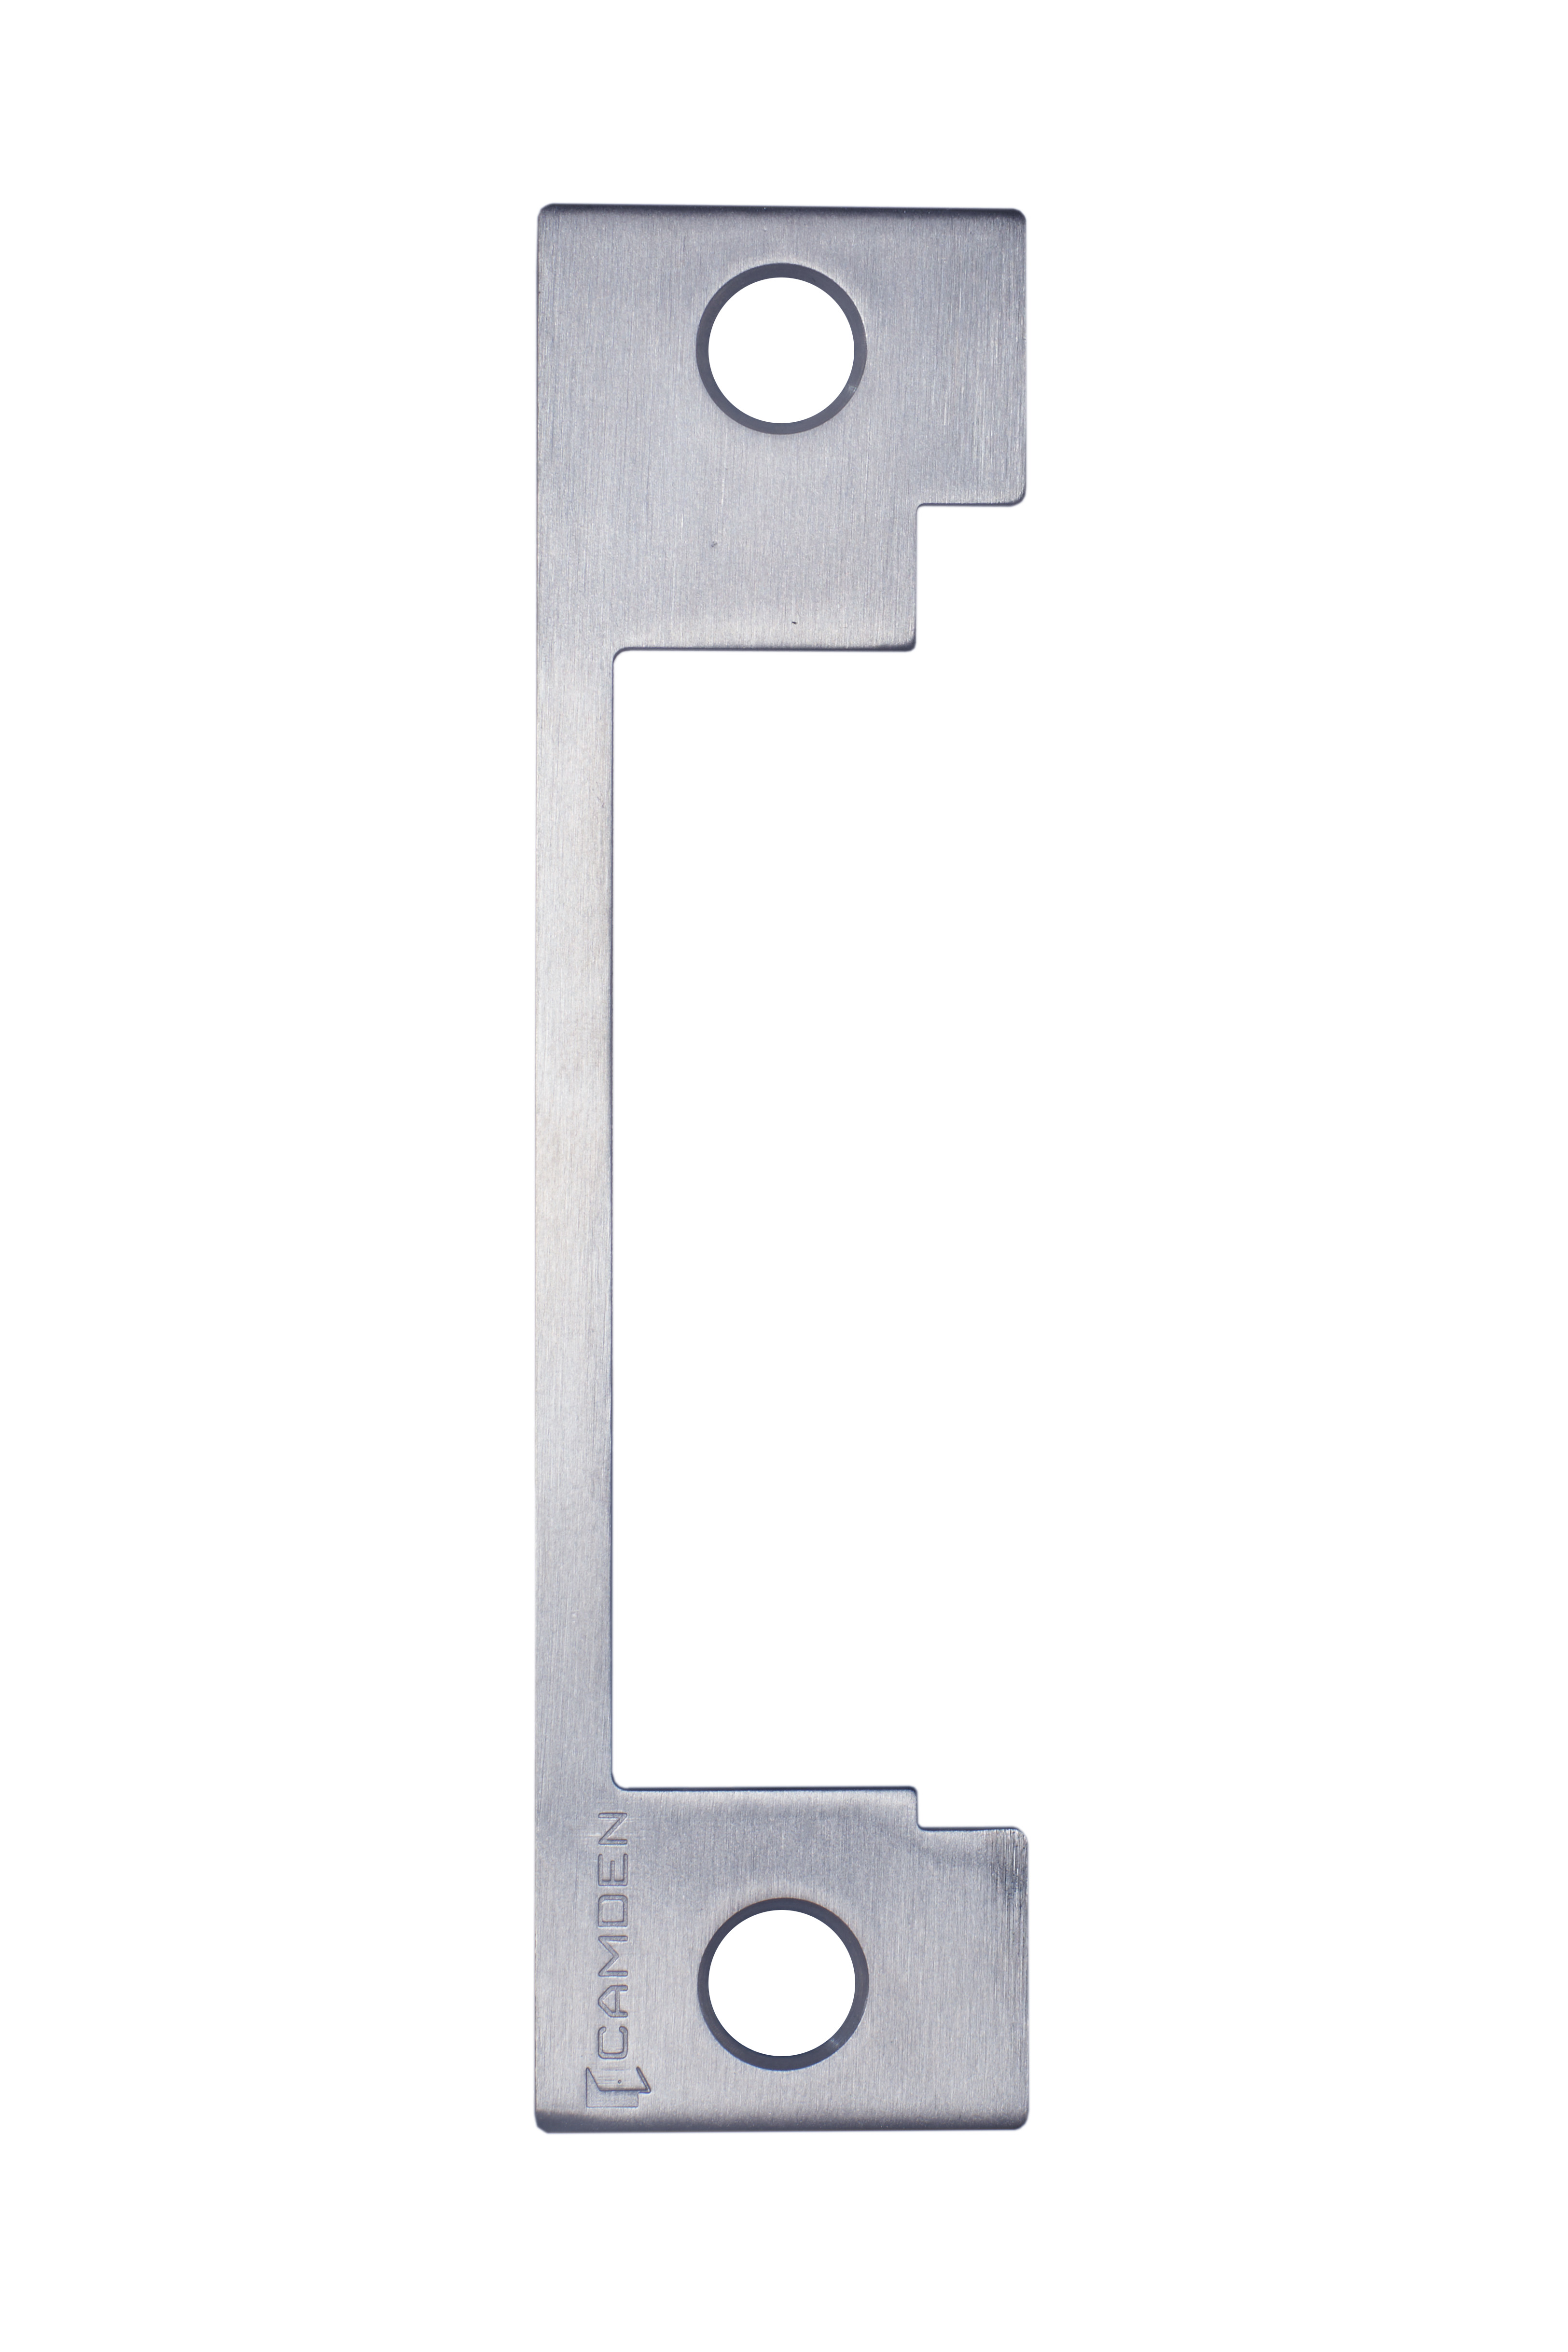 CM-45K: CM-45/46 Series:4-1/2 Inch Square Push Plate Switches - All Active Switches - Push Plate Switches